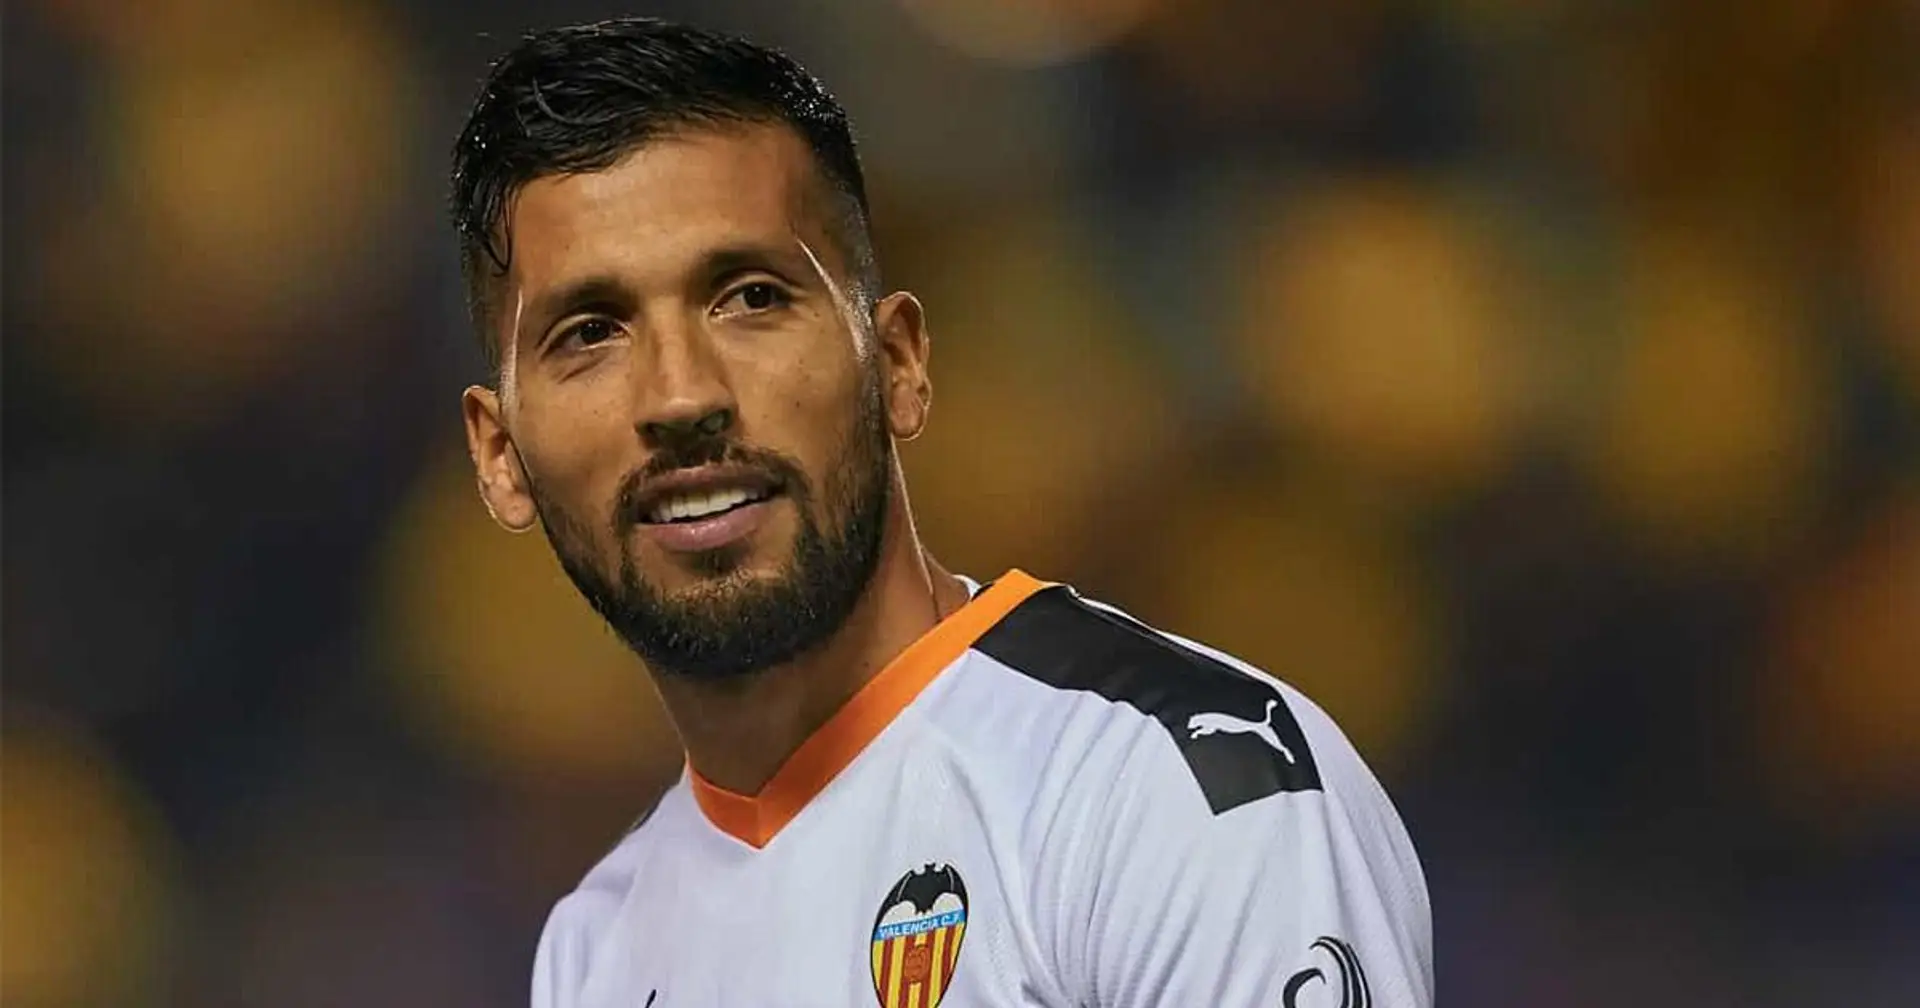 Liverpool 'have been offered' ex-Valencia centre-back Ezequiel Garay as emergency back-up (reliability: 4 stars)